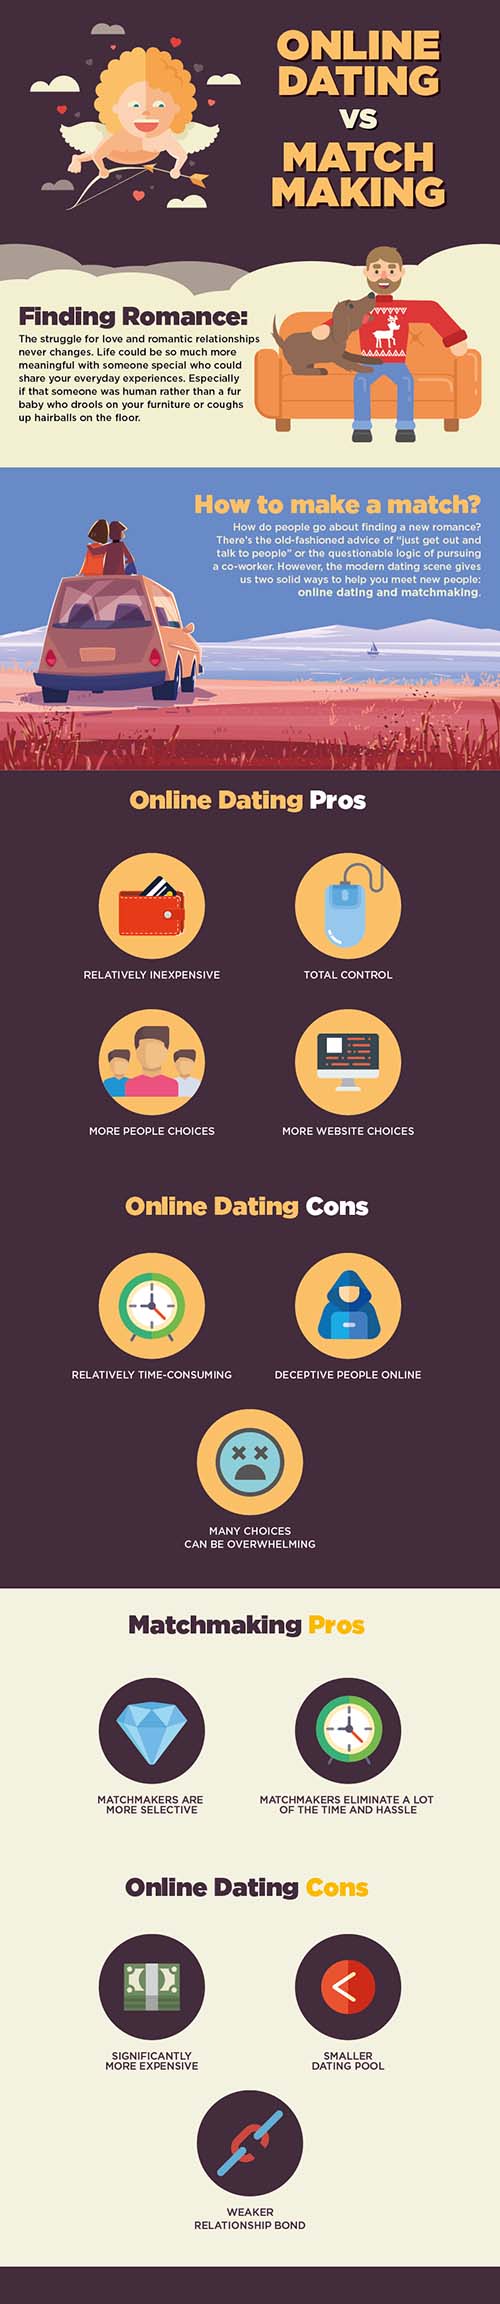 online dating vs matchmacking pros and cons